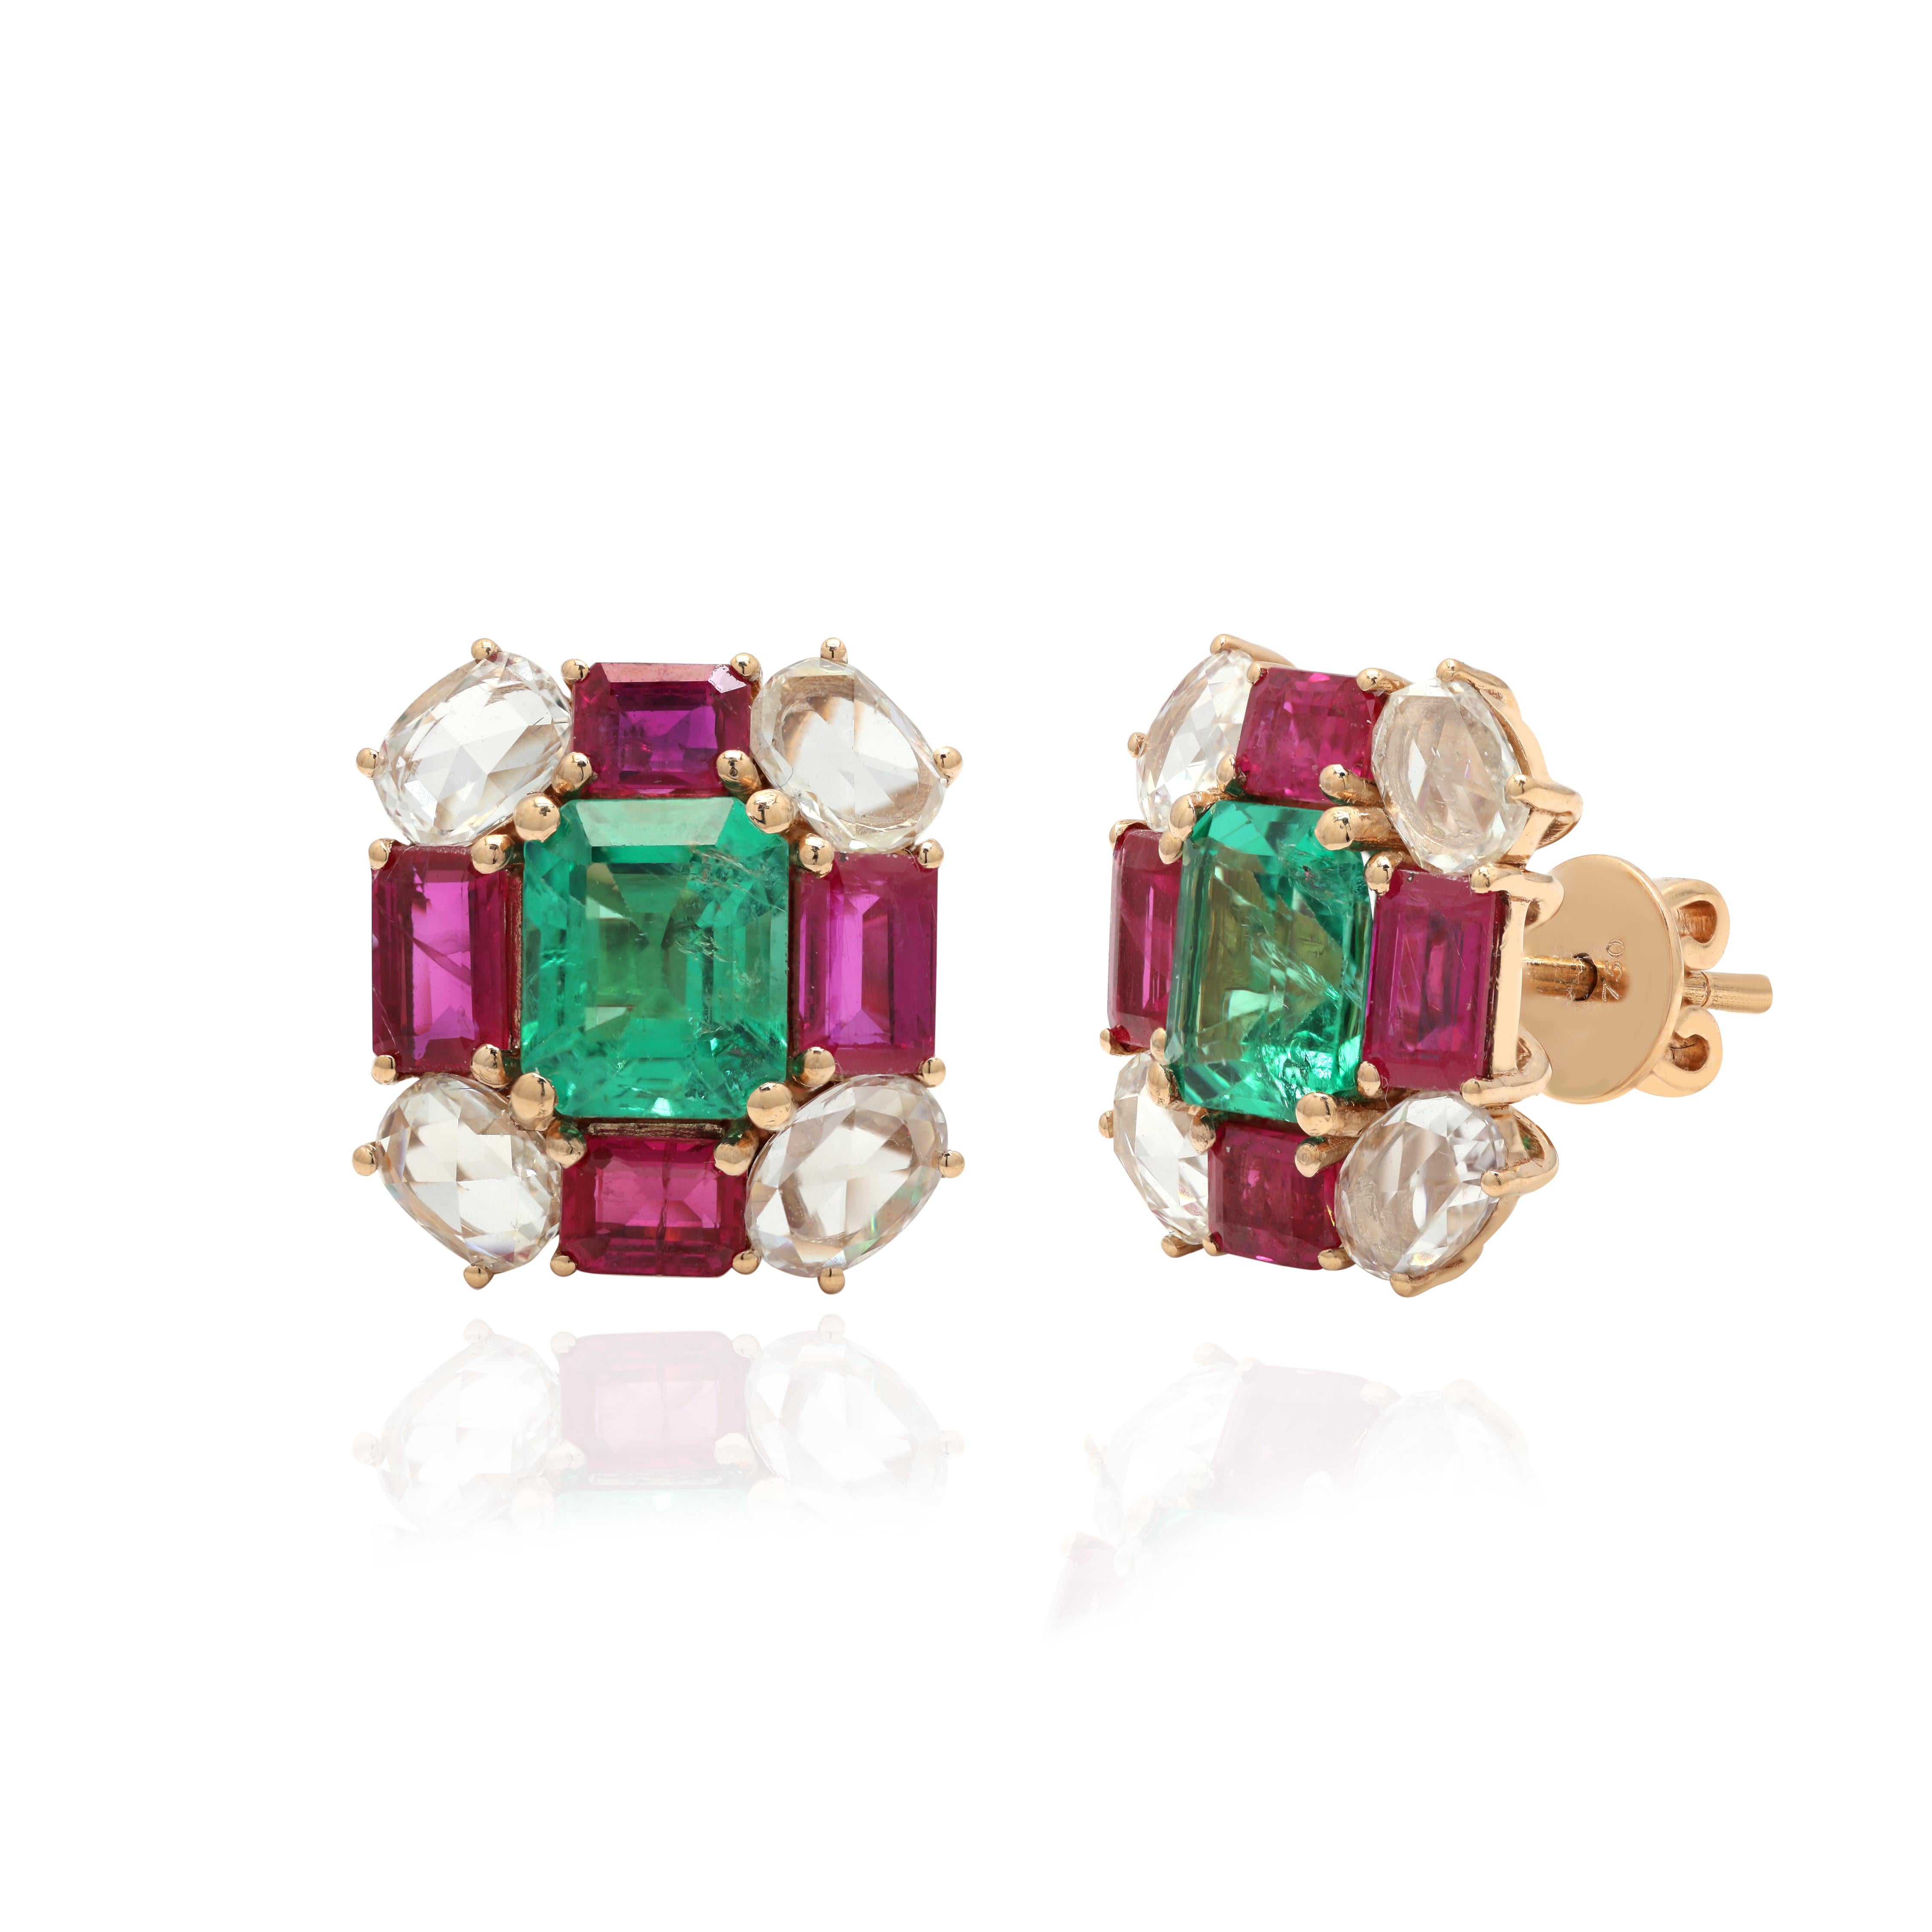 Studs create a subtle beauty while showcasing the colors of the natural precious gemstones and illuminating diamonds making a statement.
Ruby with diamonds stud earrings in 18K gold. Embrace your look with these stunning pair of earrings suitable